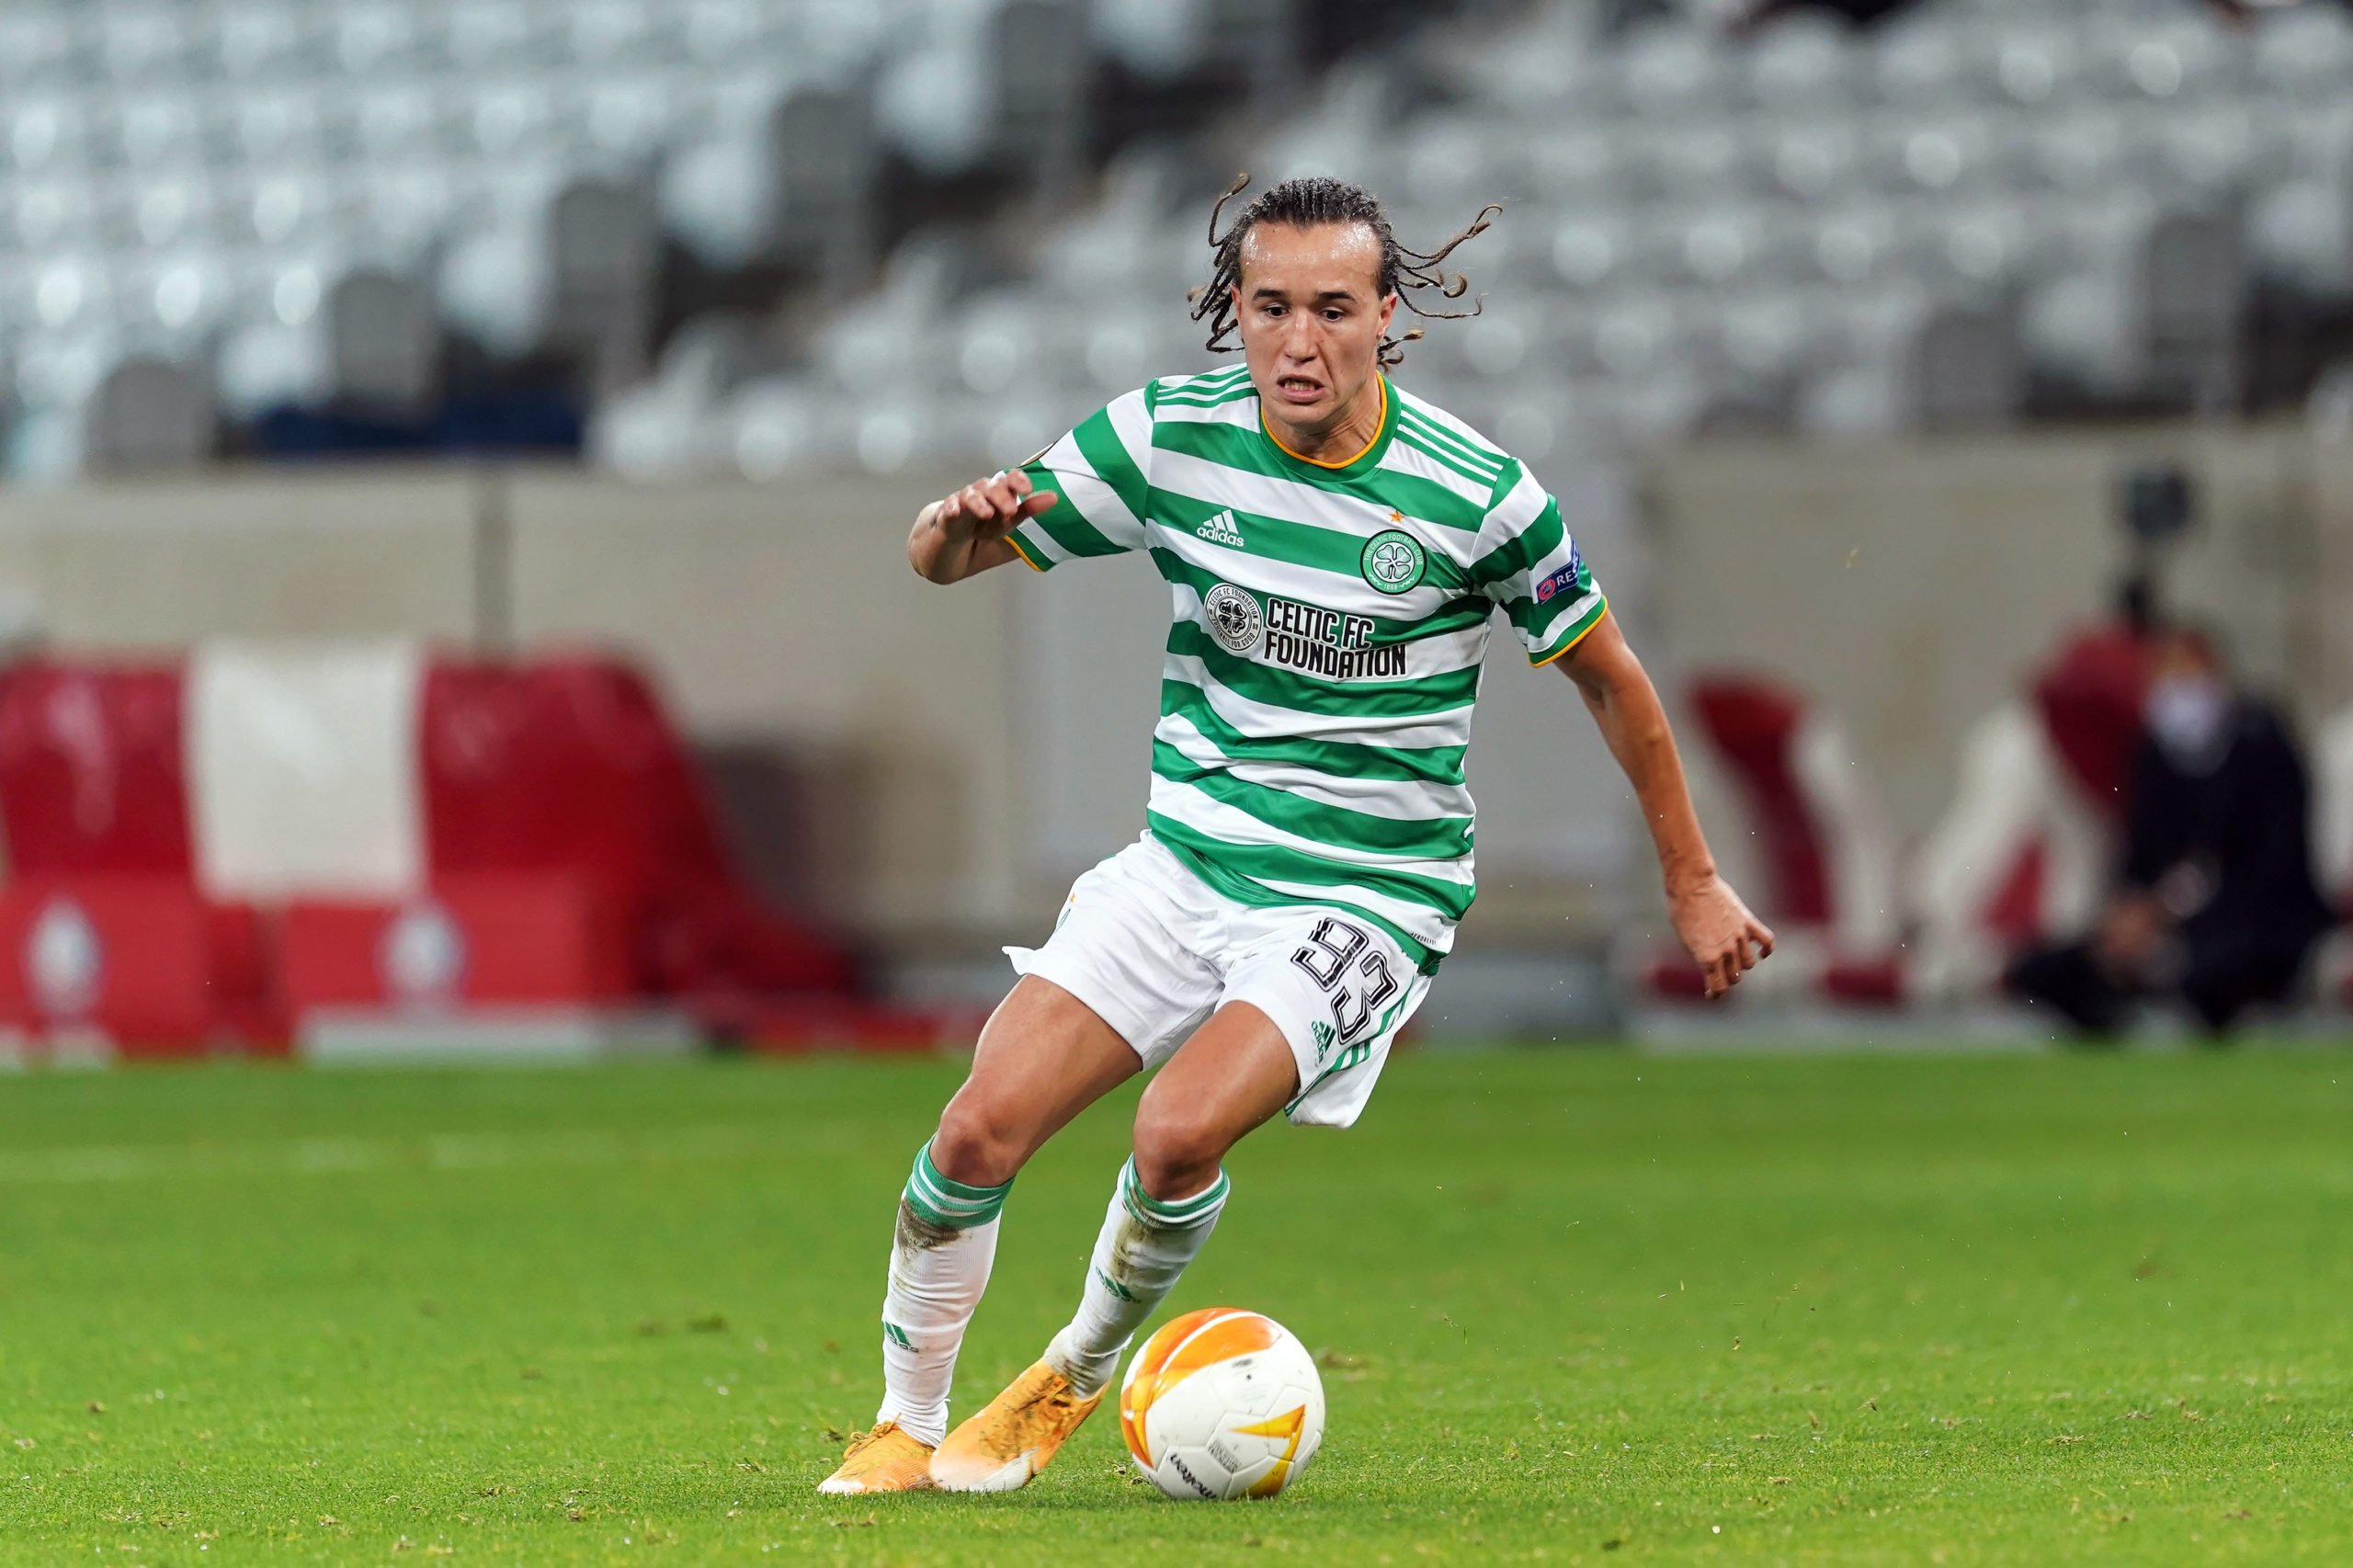 Diego Laxalt has had an excellent start to his Celtic career